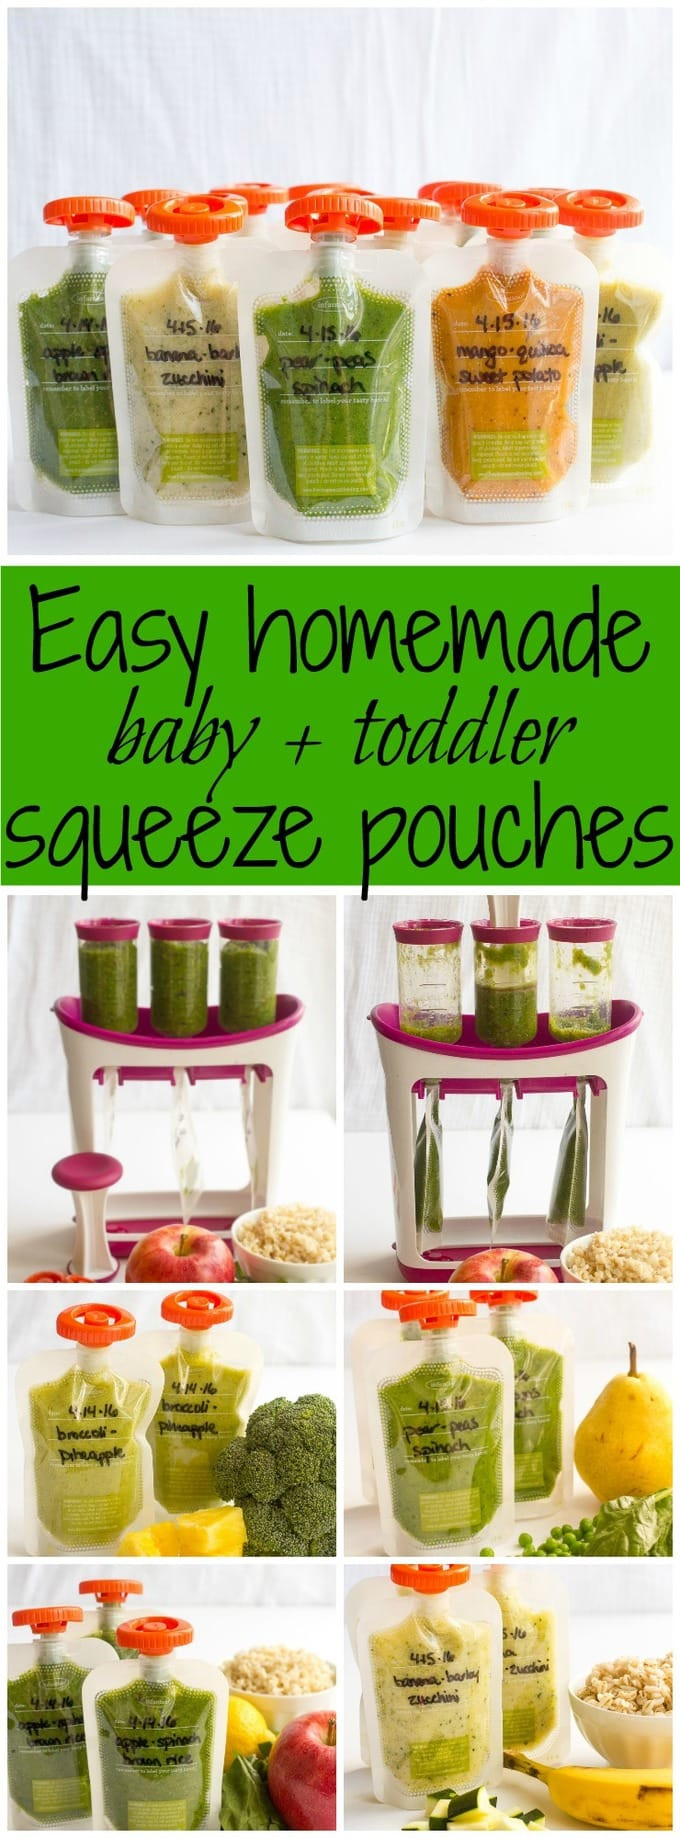 Baby Pouch Recipes
 Homemade baby food pouches how to and 5 recipes Family